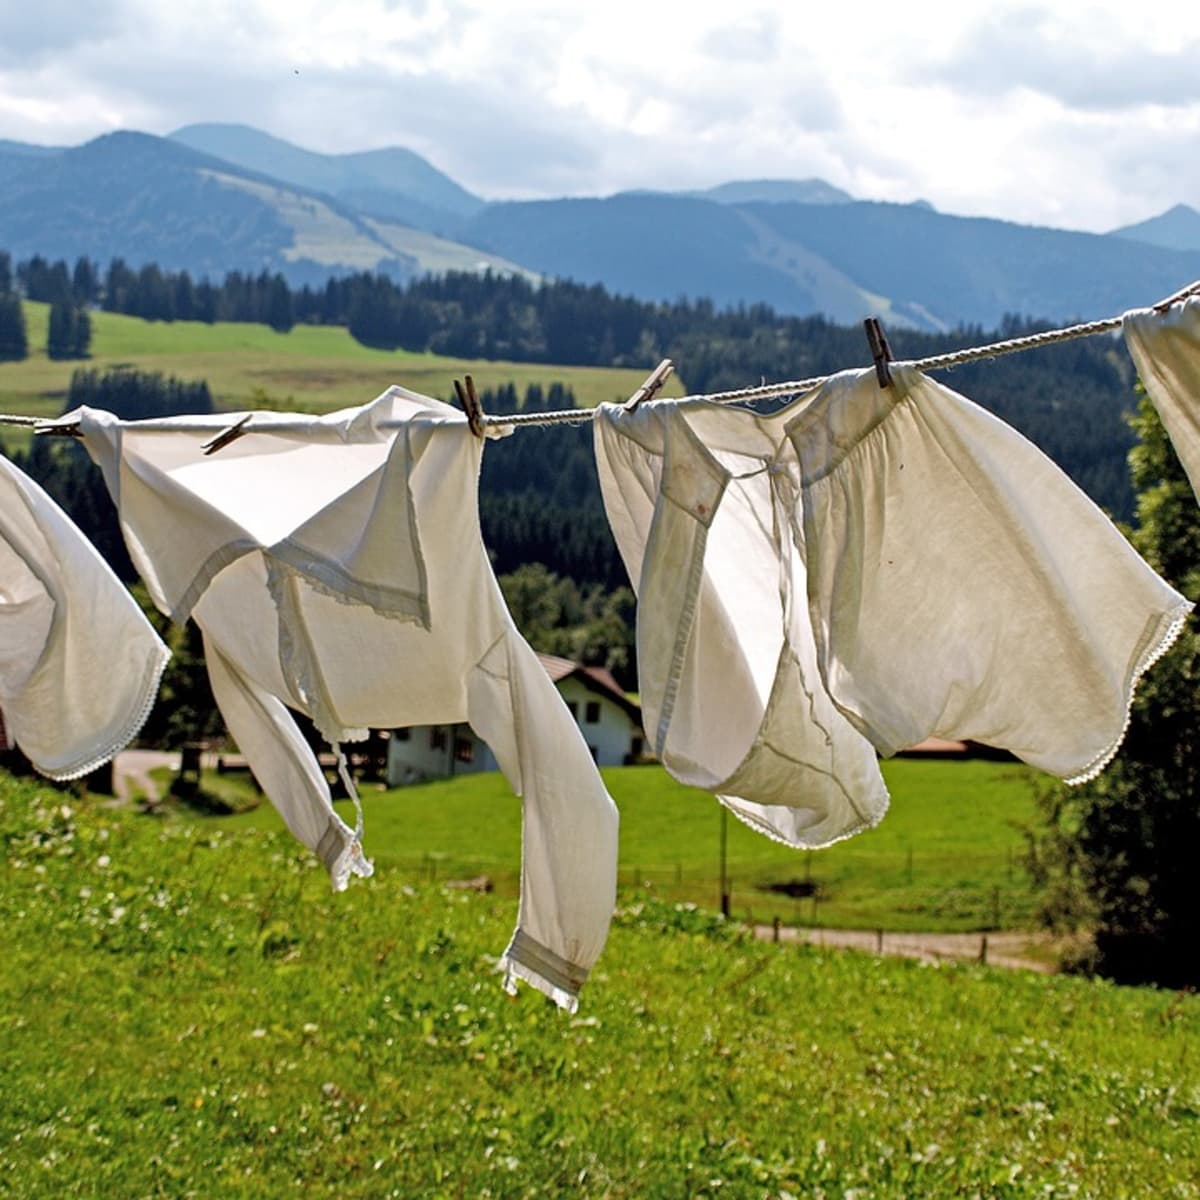 How to dry clothes properly in winter or when it's raining